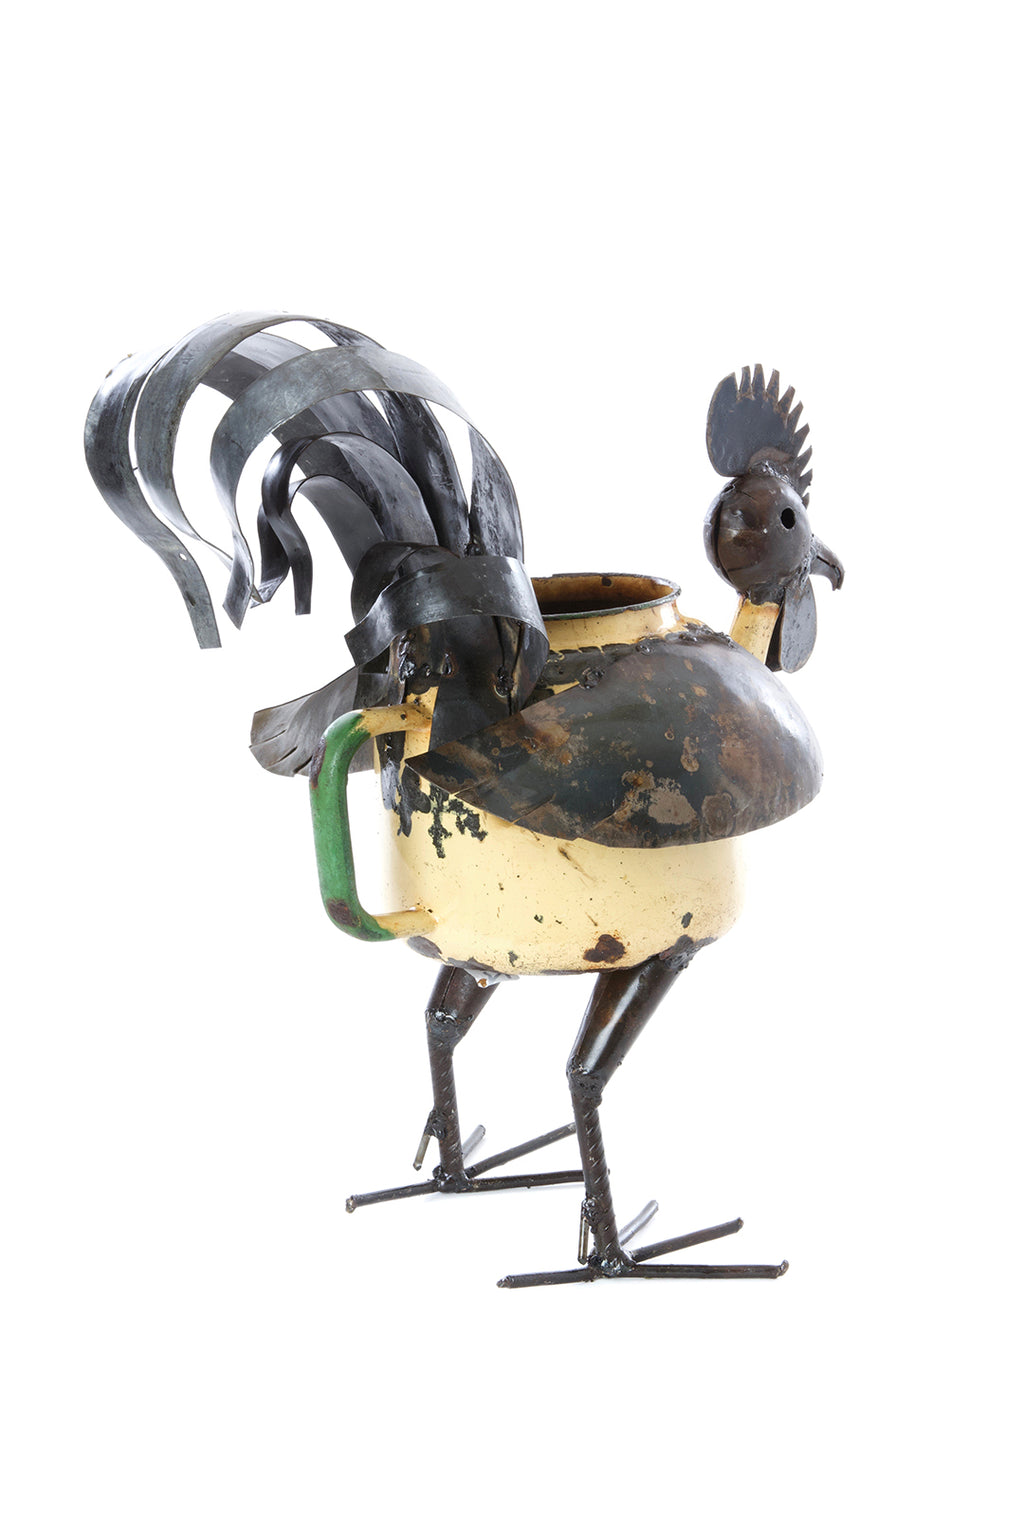 Small Zimbabwean Recycled Teapot Rooster Planter